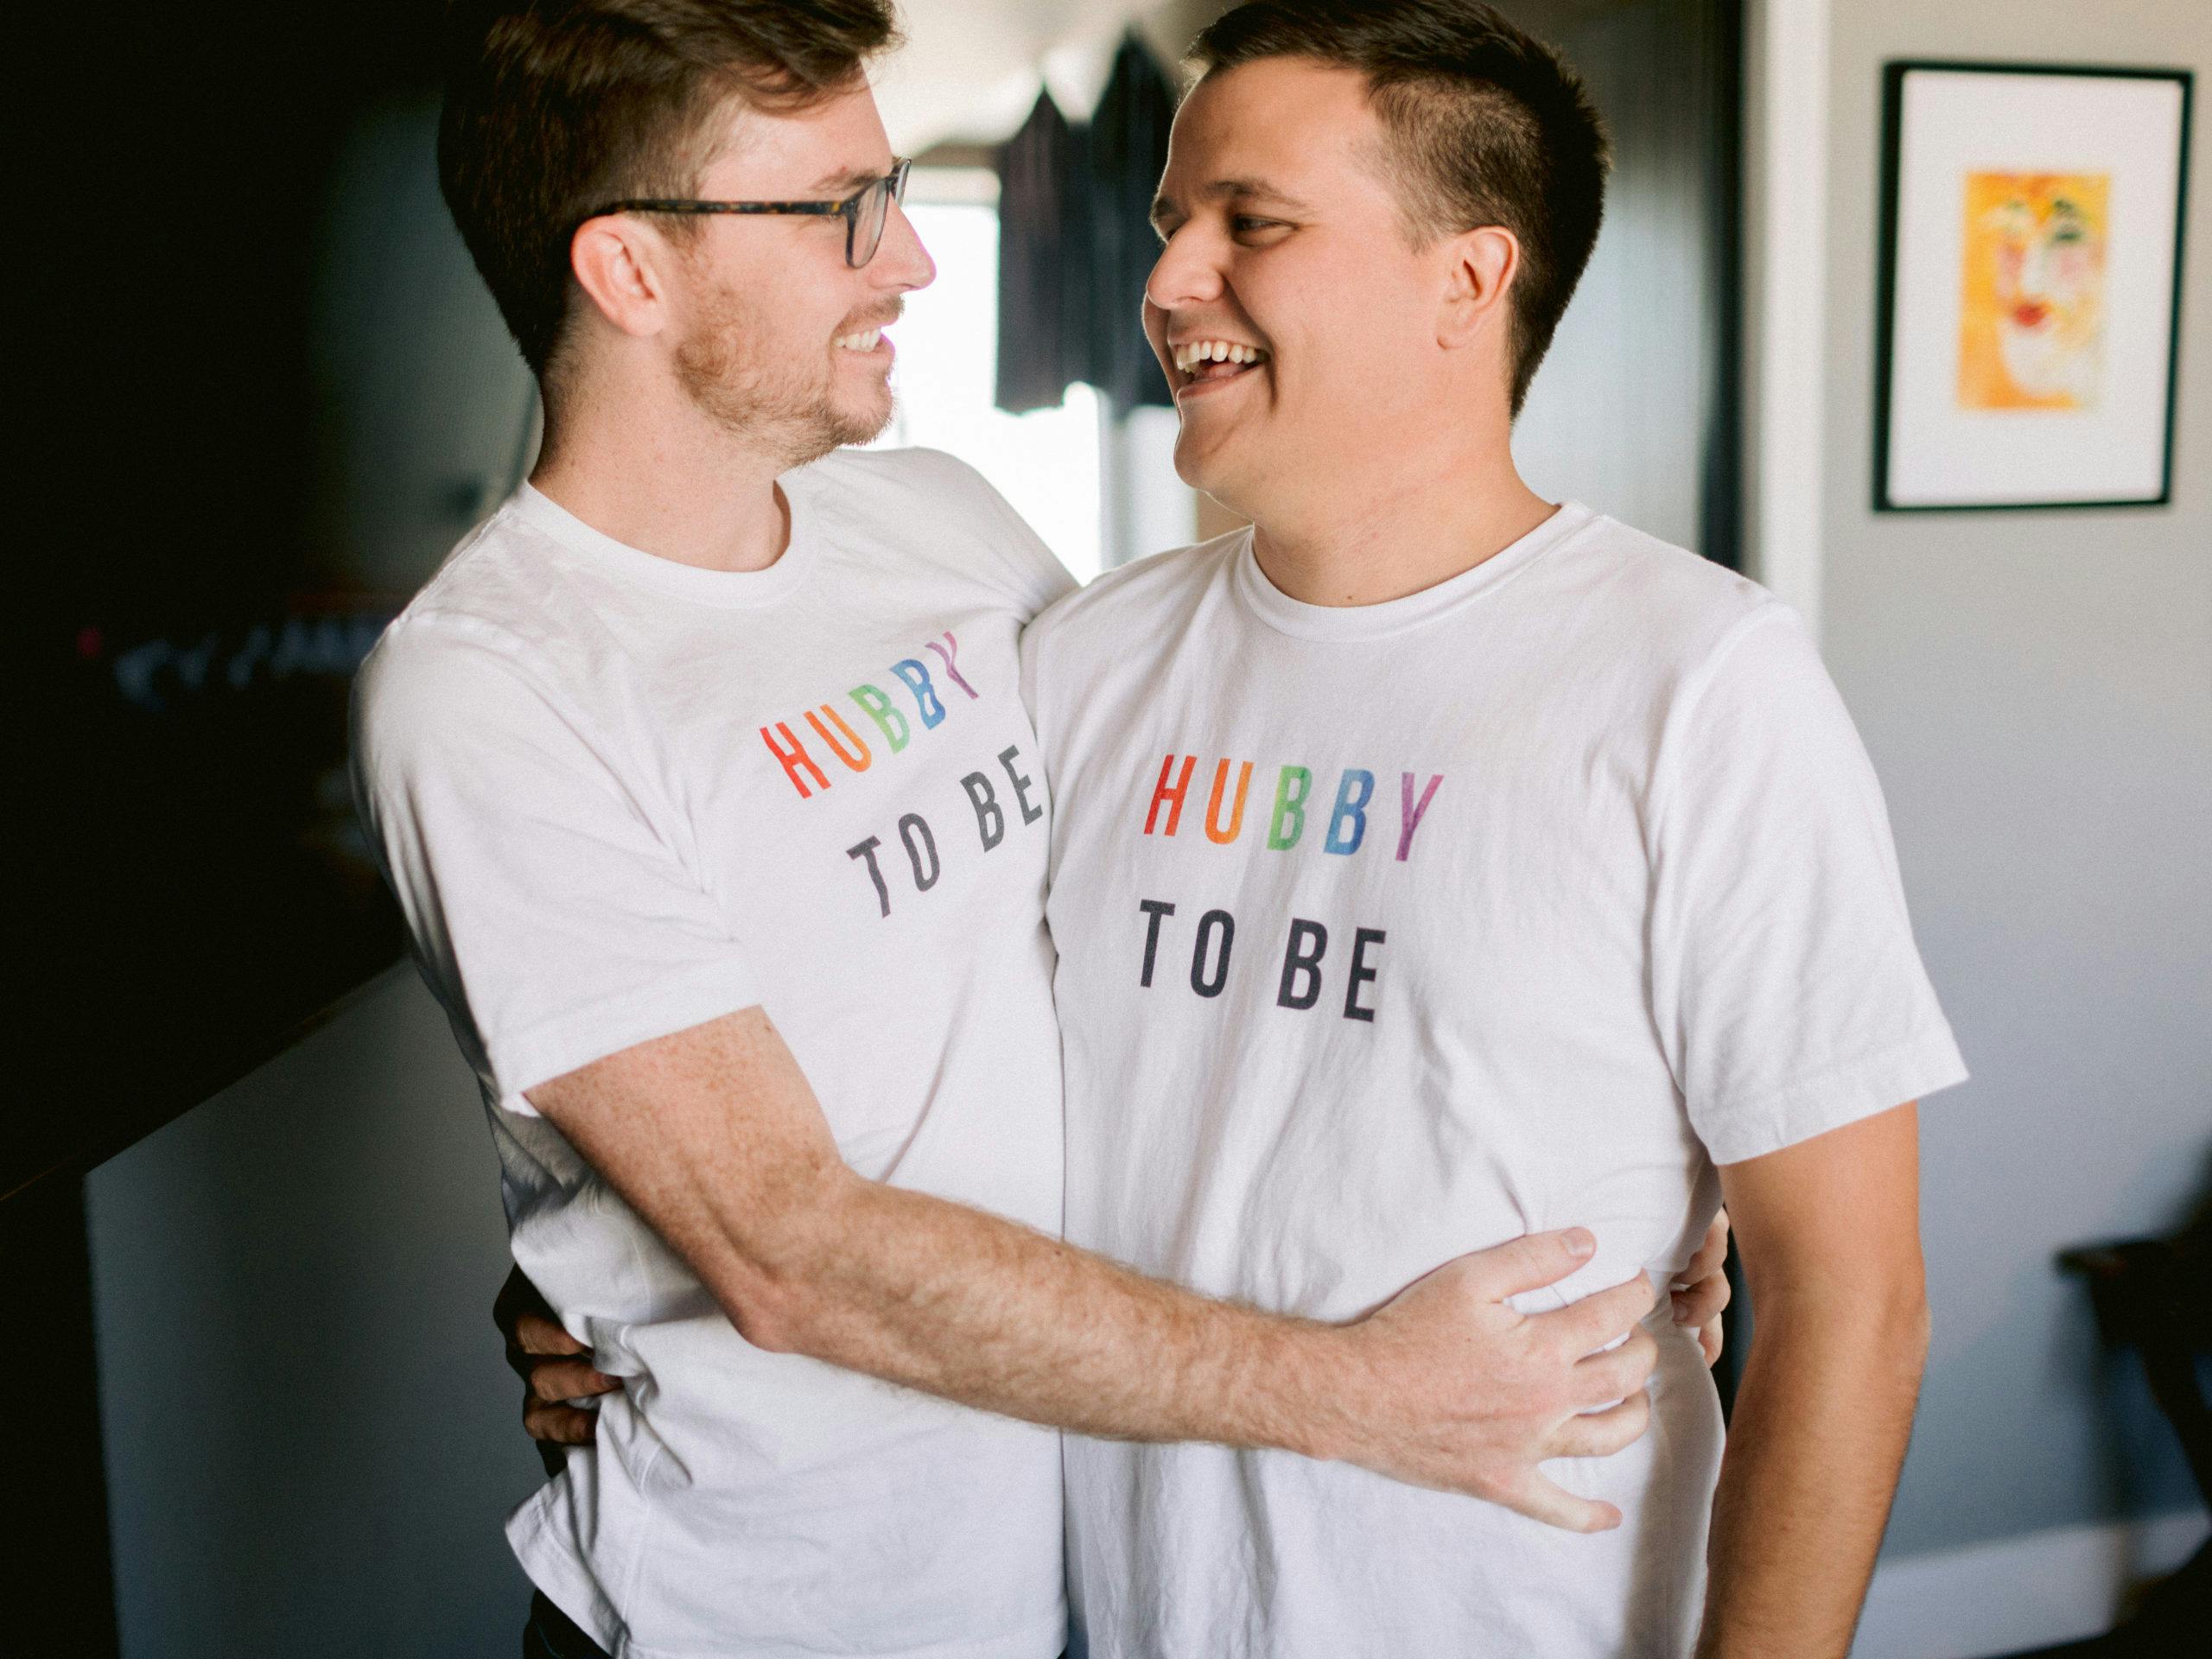 grooms in matching “Hubby To Be” t-shirts embrace | PartySlate